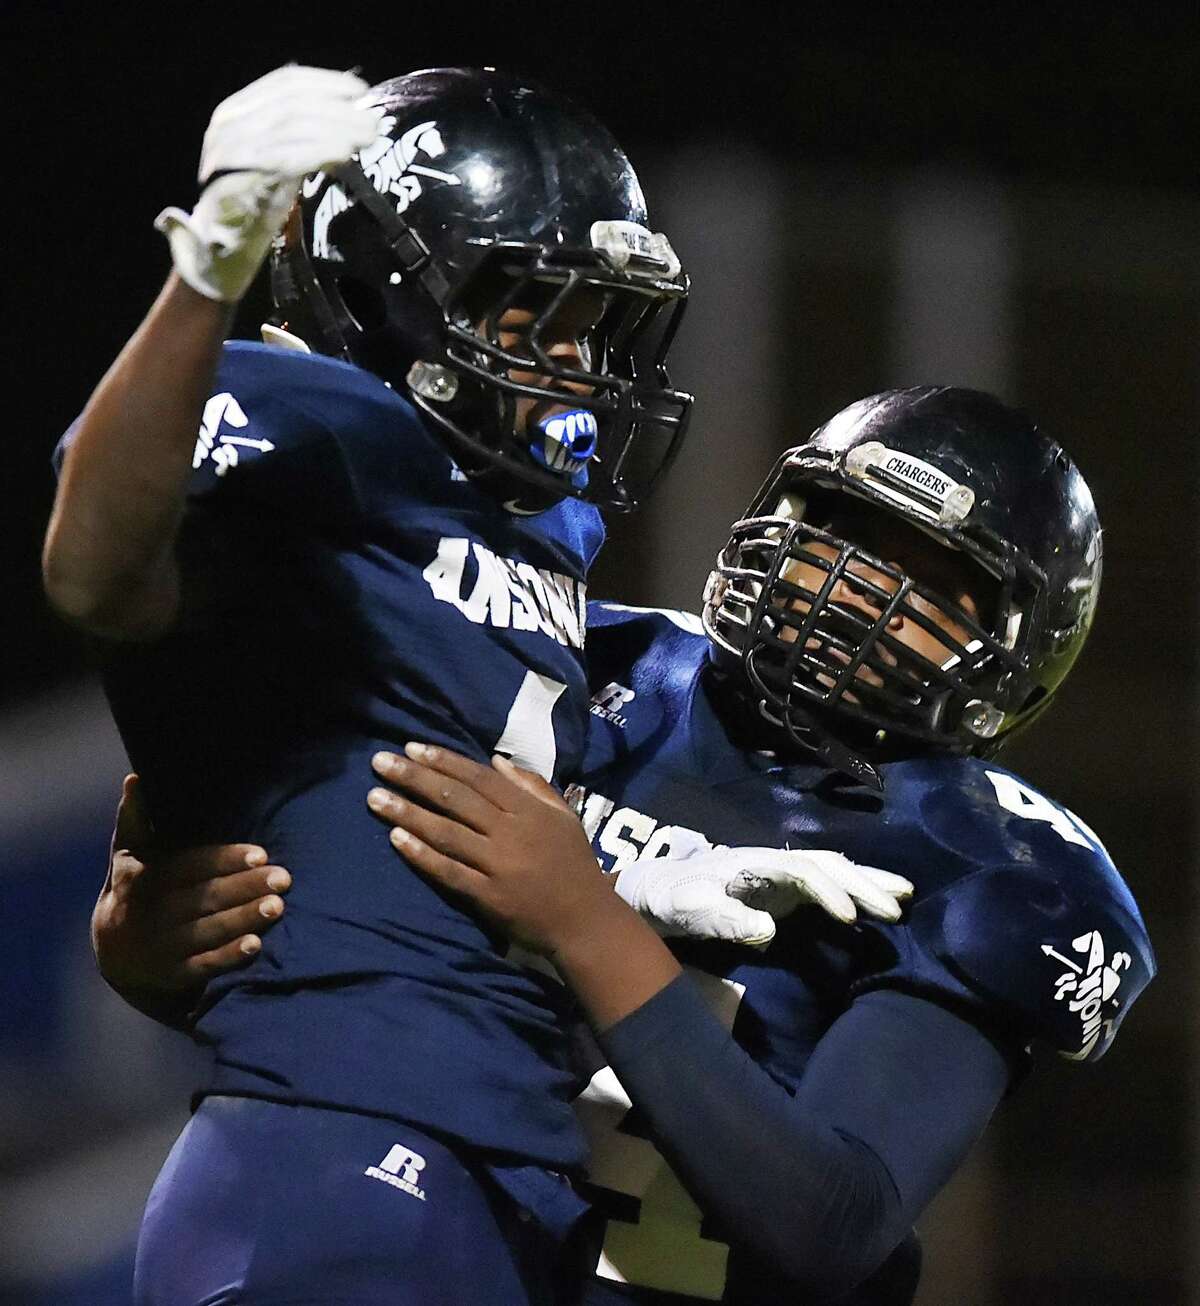 Ansonia’s Markell Dobbs celebrates one of his touchdowns against Valley rival Seymour on Friday. (Catherine Avalone/New Haven Register)